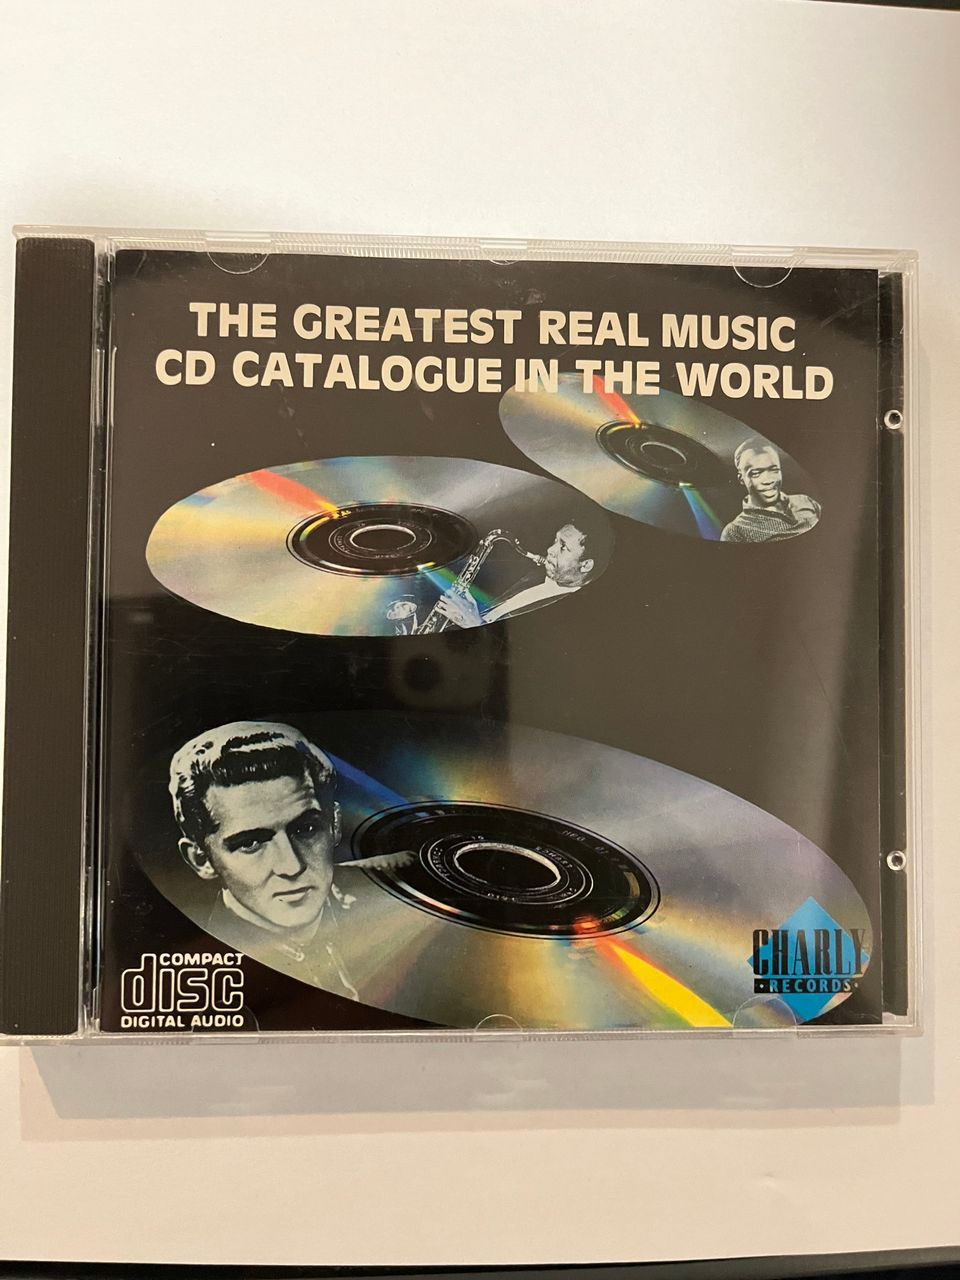 The createst real music (cd catalogue in the world)